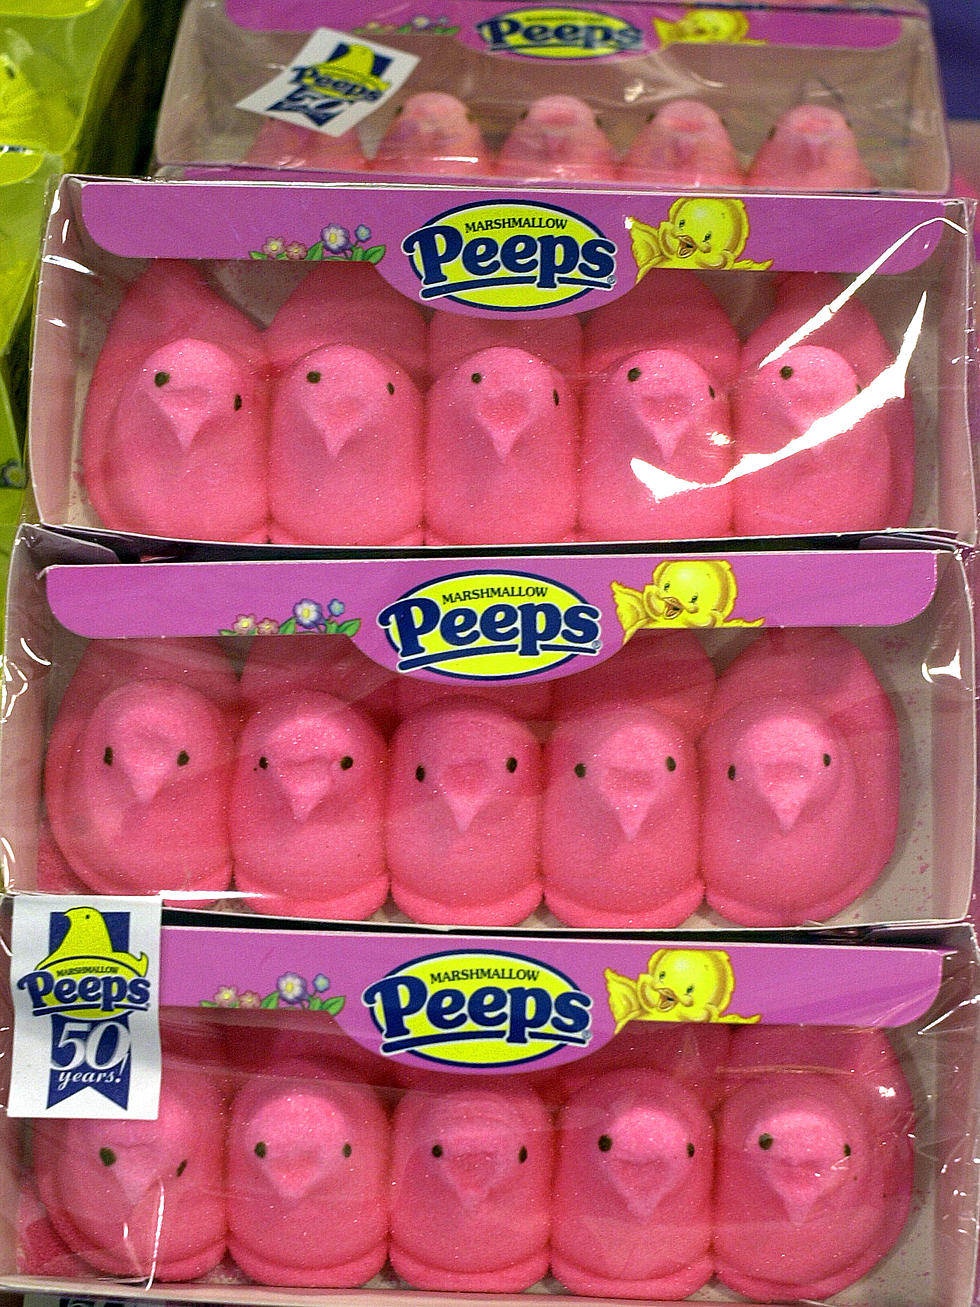 Peeps Are An Easter Standby, But Do You Really Like Them? [POLL]